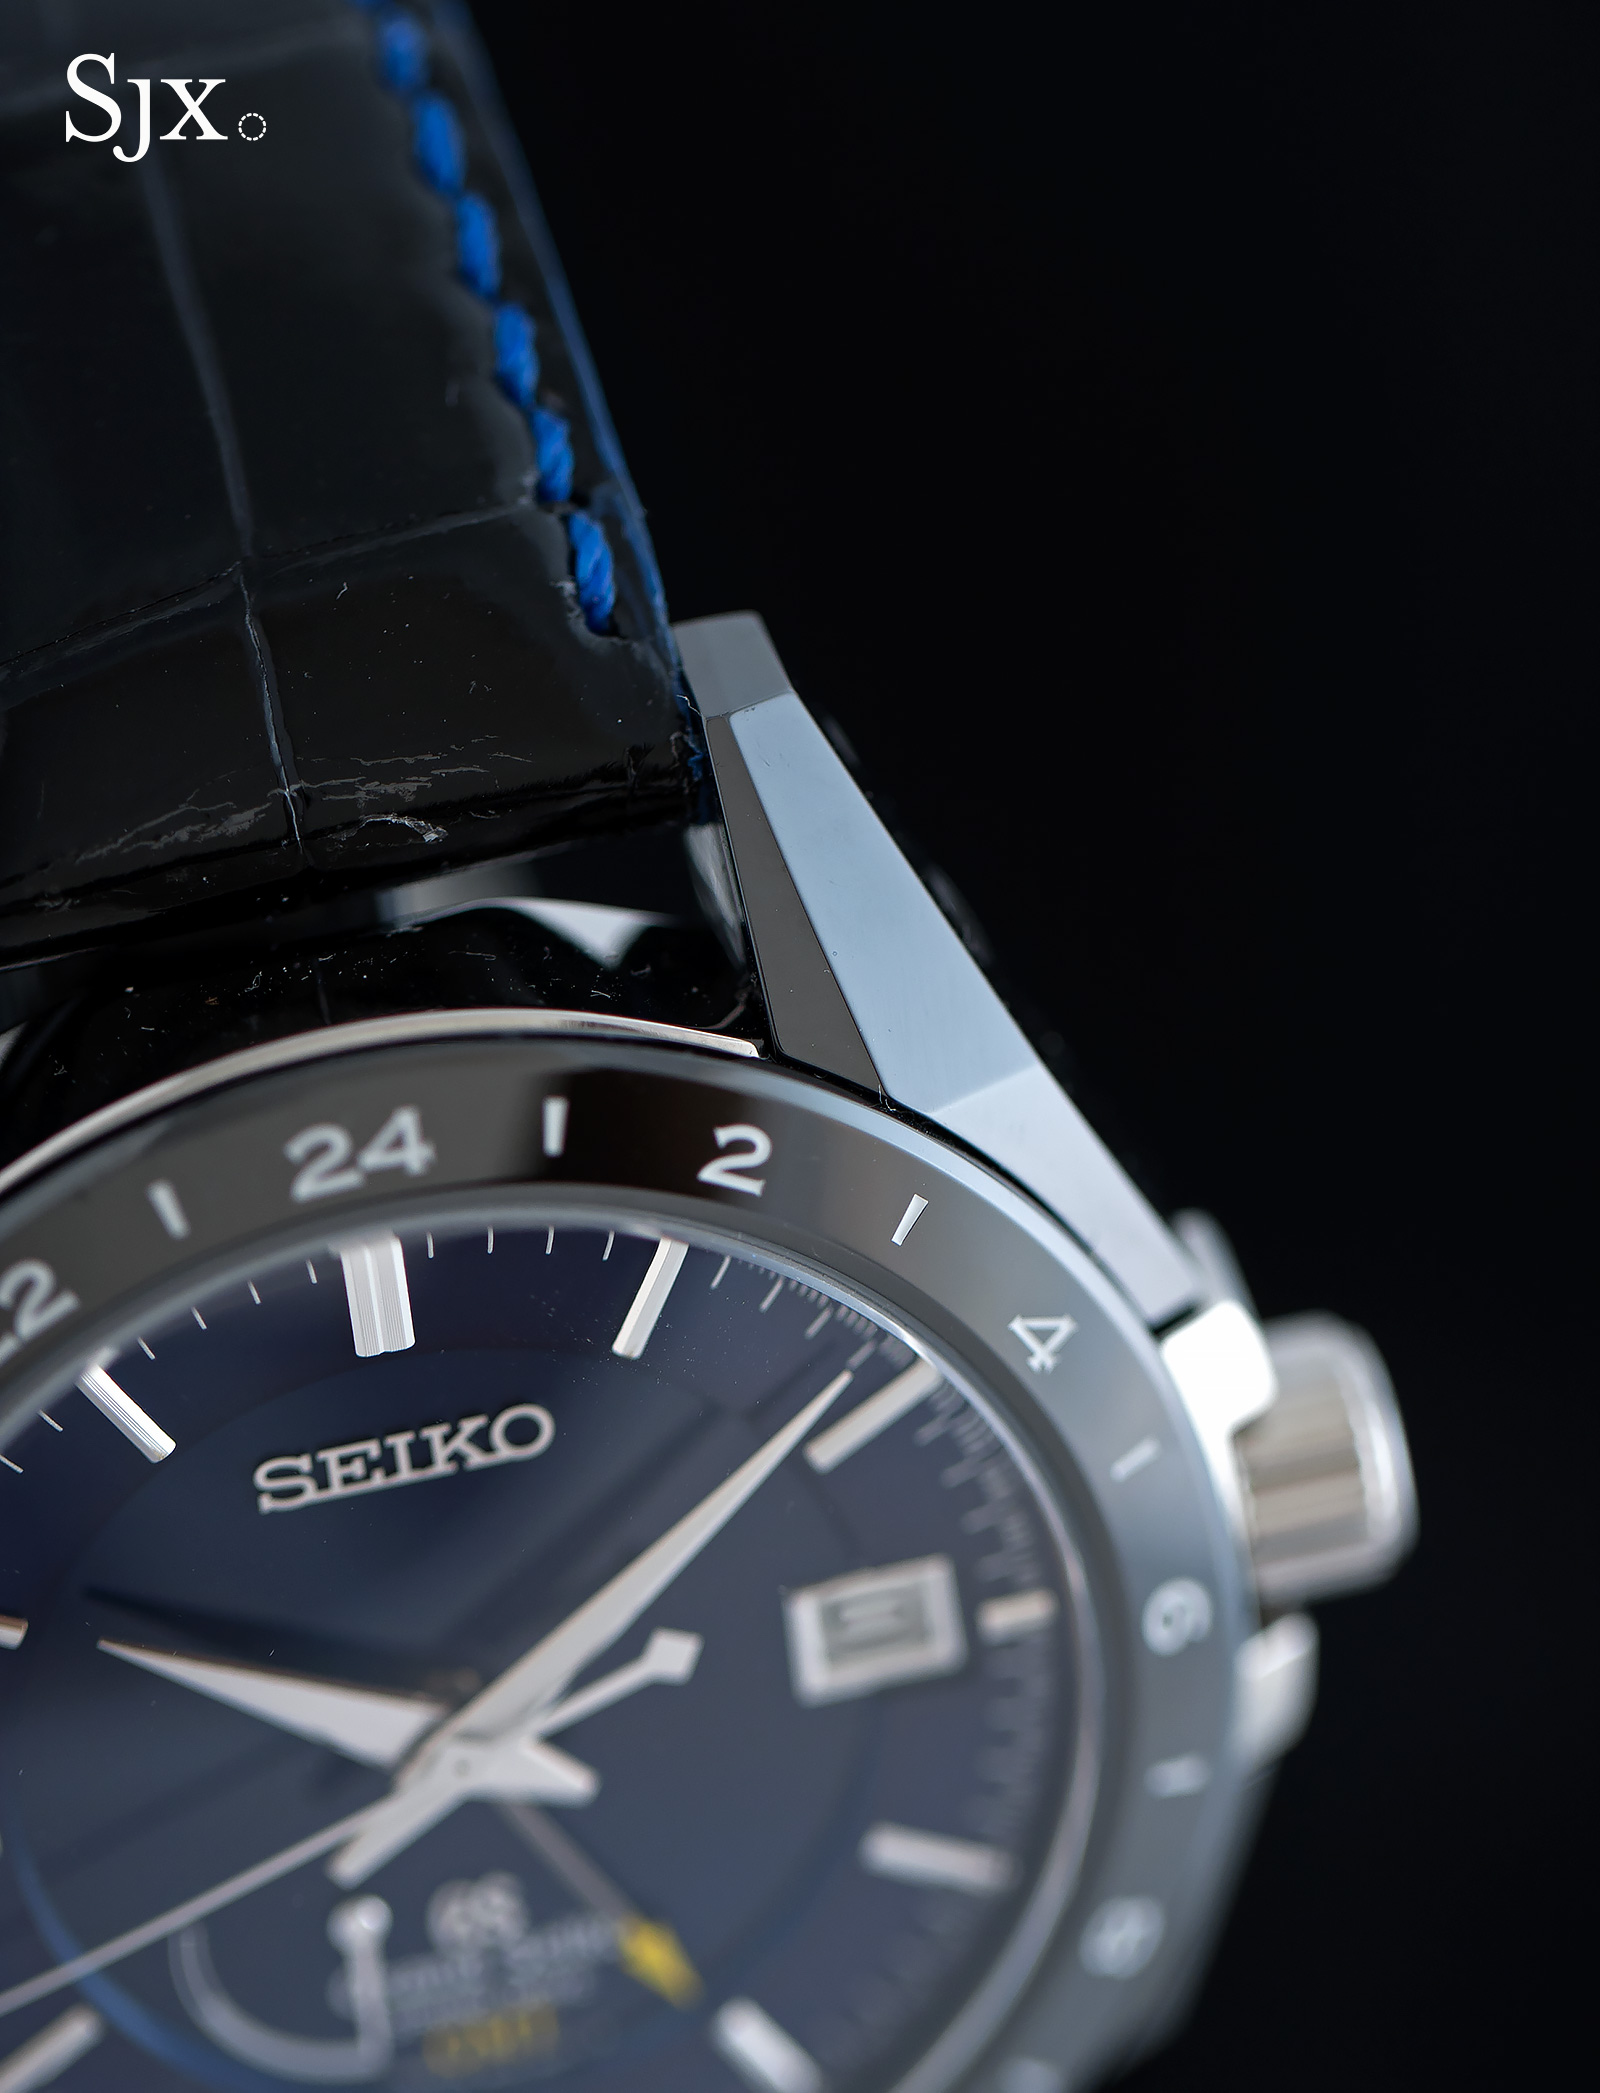 A Detailed Look at the Grand Seiko Black Ceramic Spring Drive “Avant-Garde”  | SJX Watches